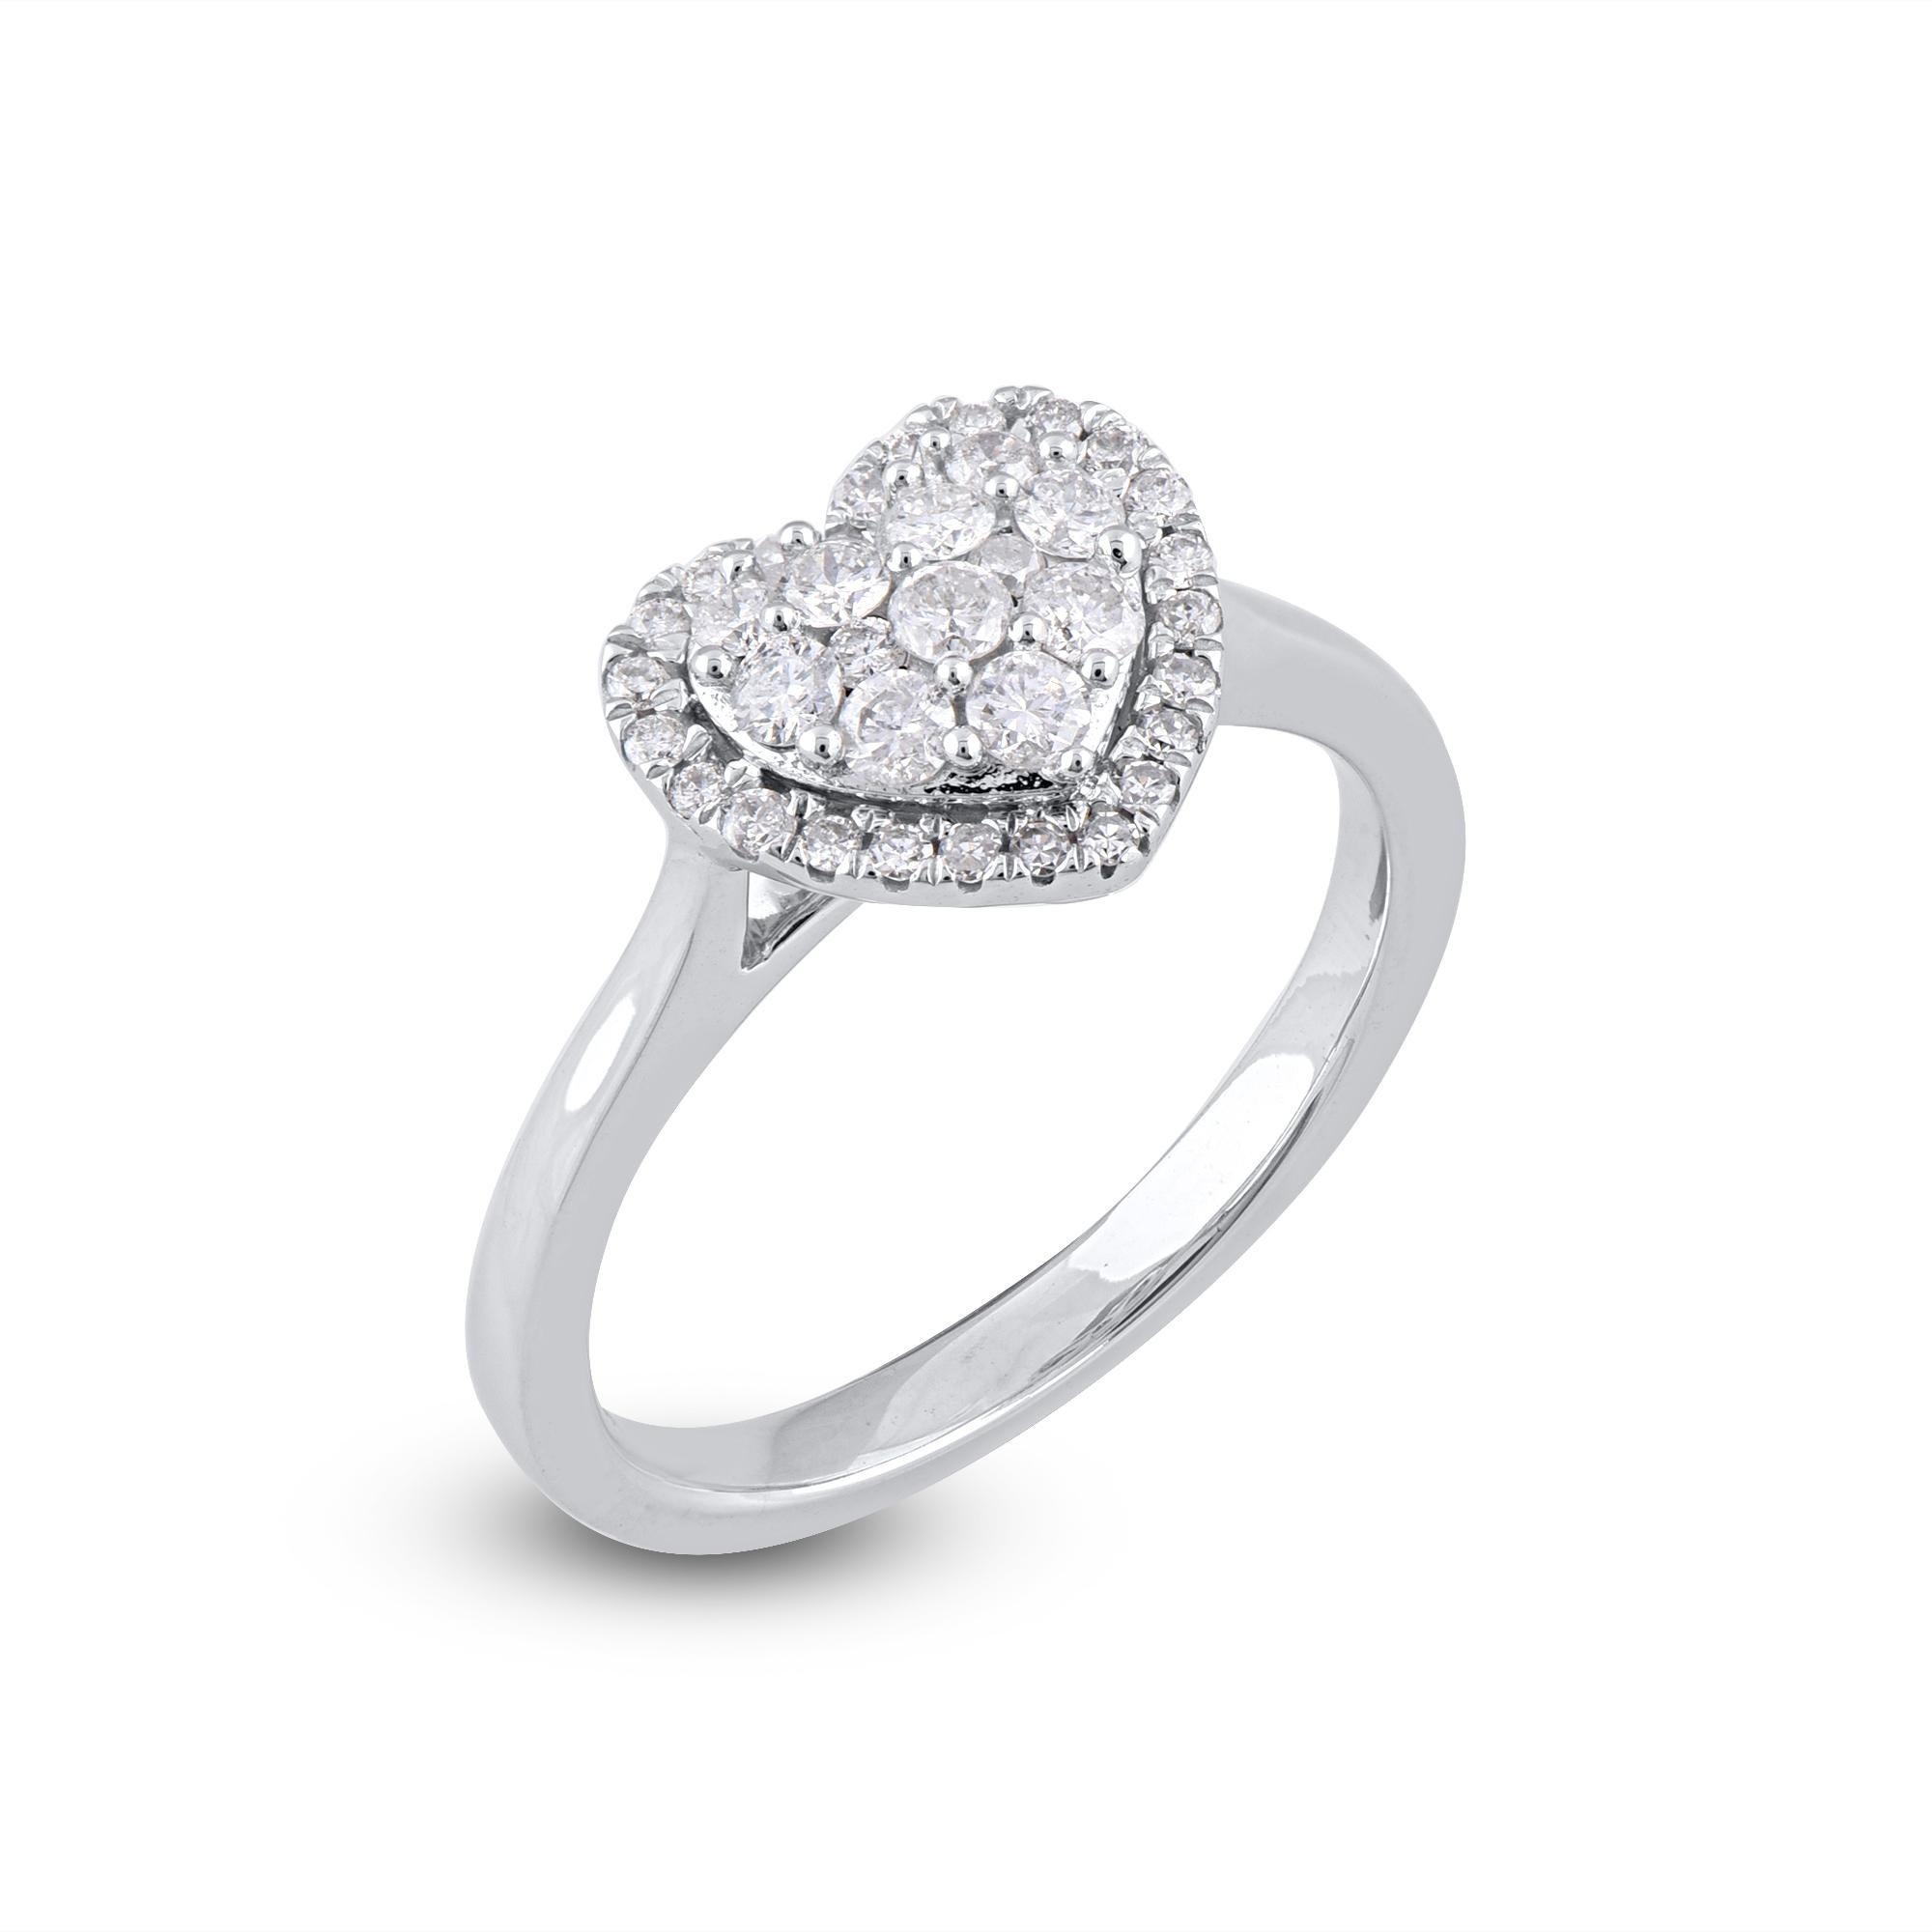 Win her heart with this classic and elegant diamond heart ring. These diamond ring are studded with 36 single cut and brilliant cut round diamonds in prong and pressure setting and crafted in 14kt white gold. The white diamonds are graded as H-I